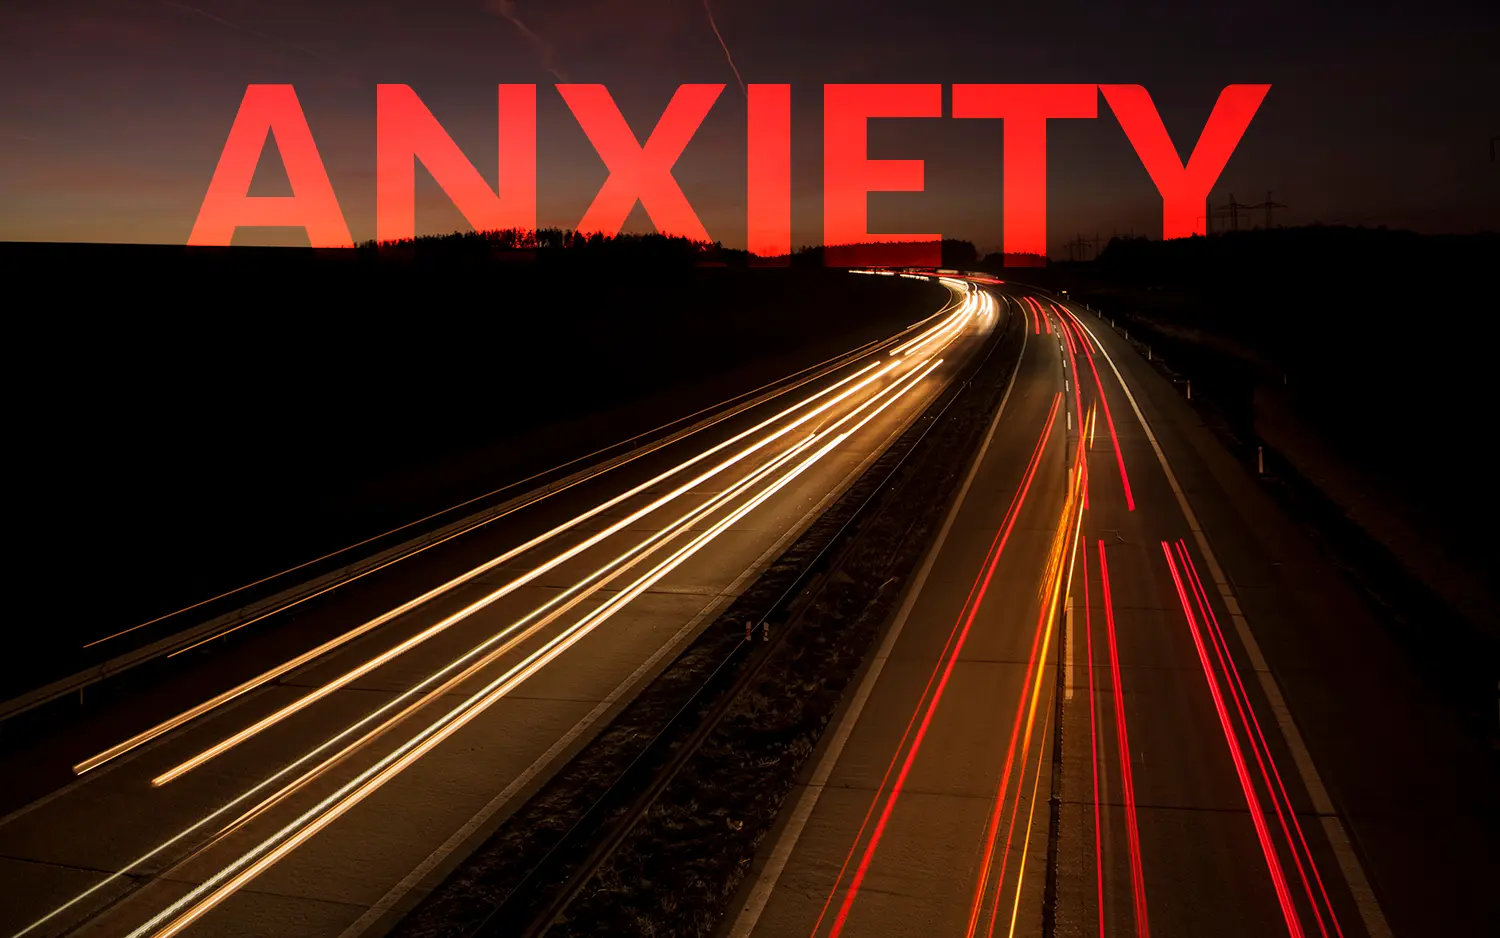 anxiety and driving do not mix well